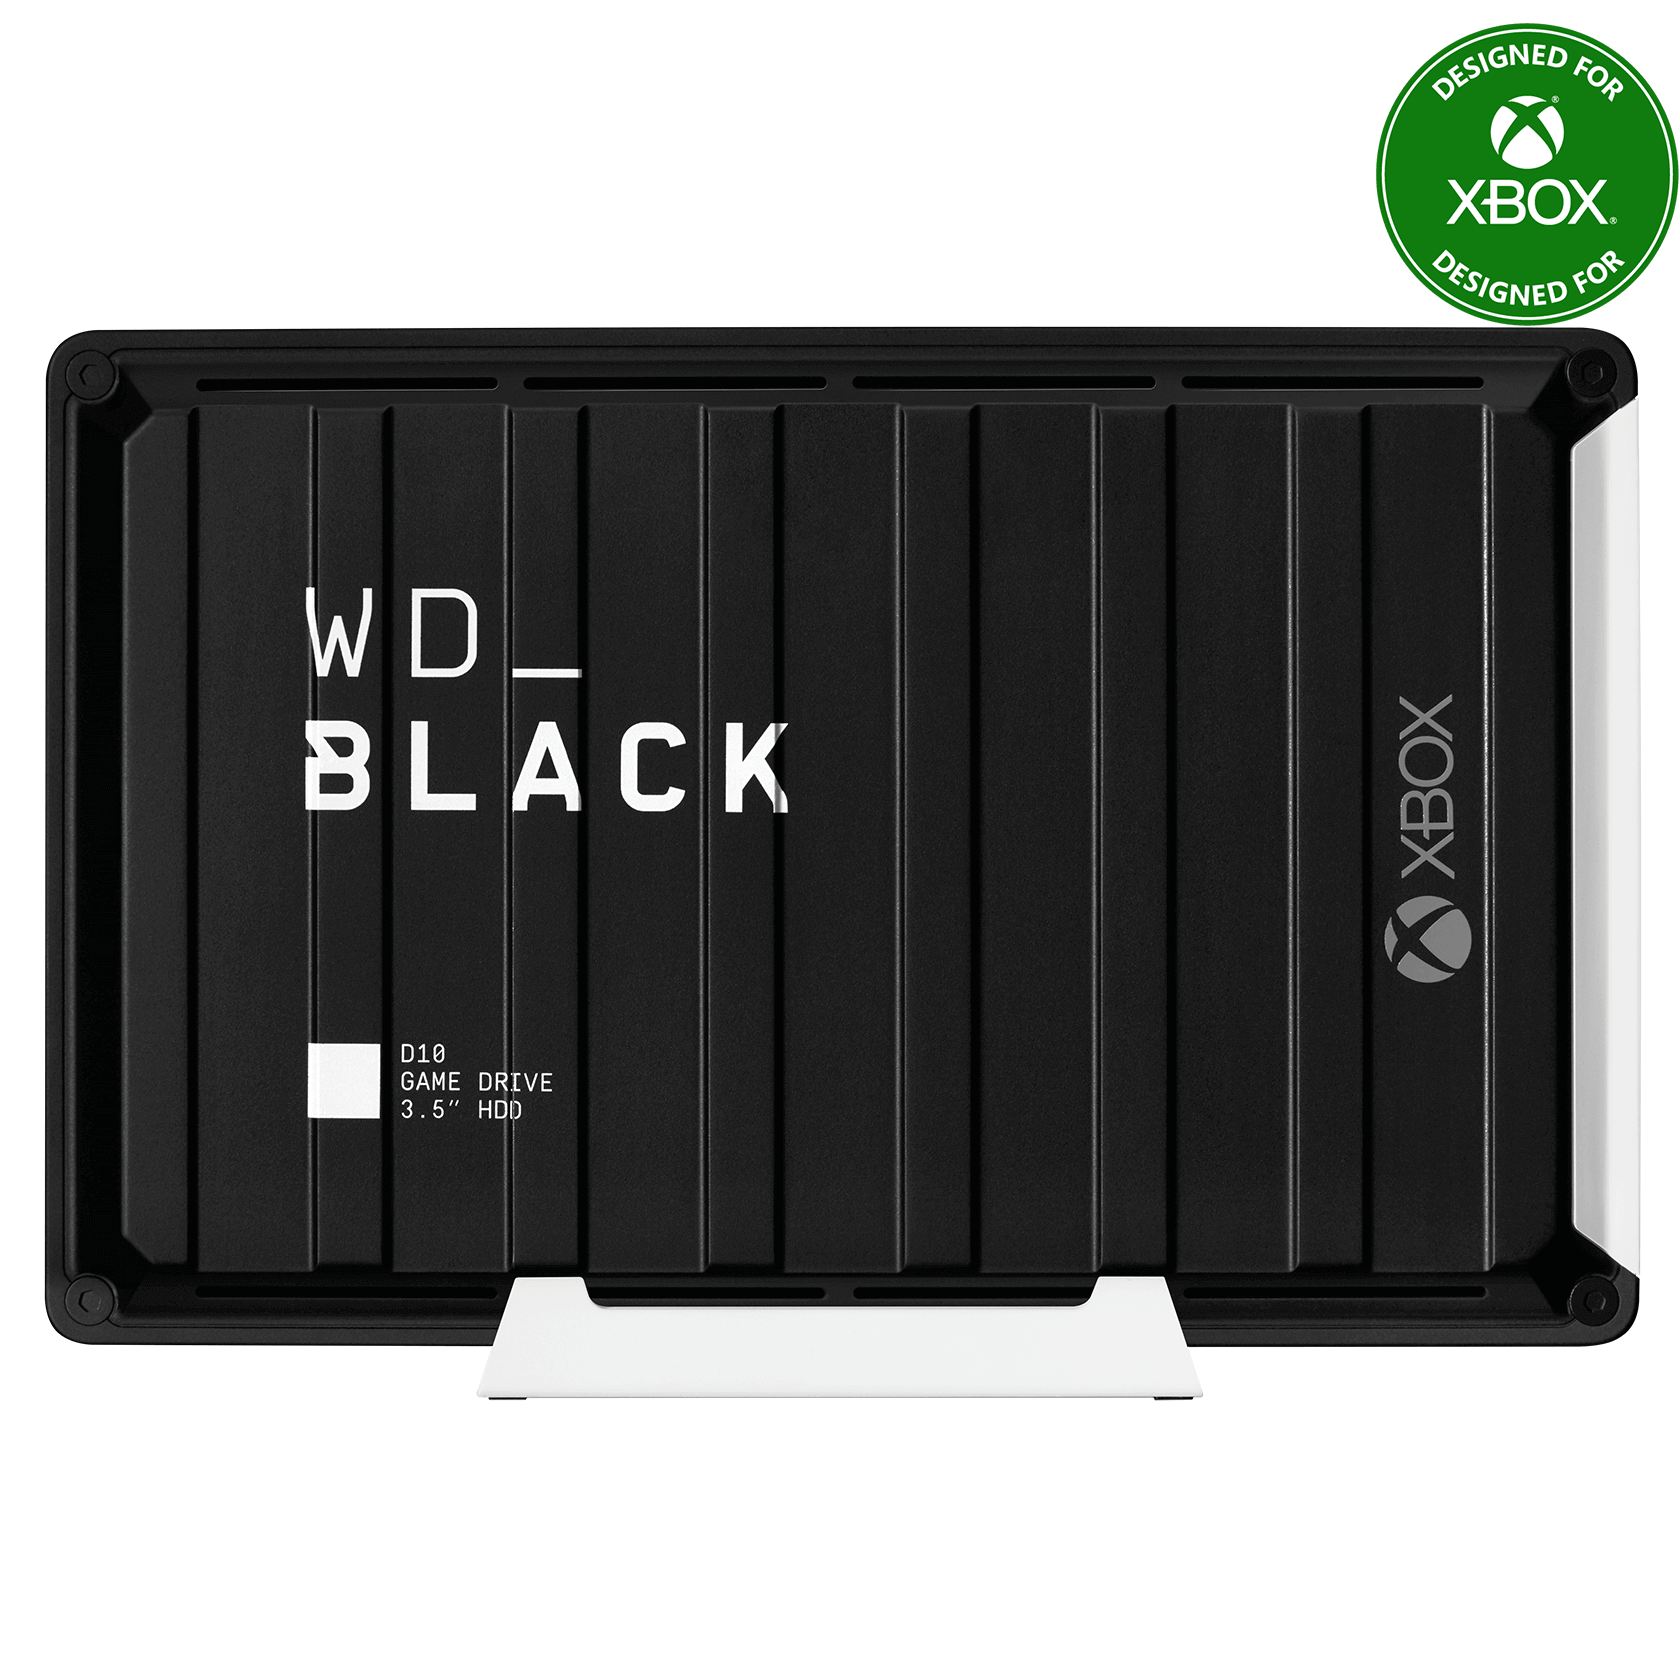 WD_BLACK D10 Game Drive for Xbox One™ 12TB